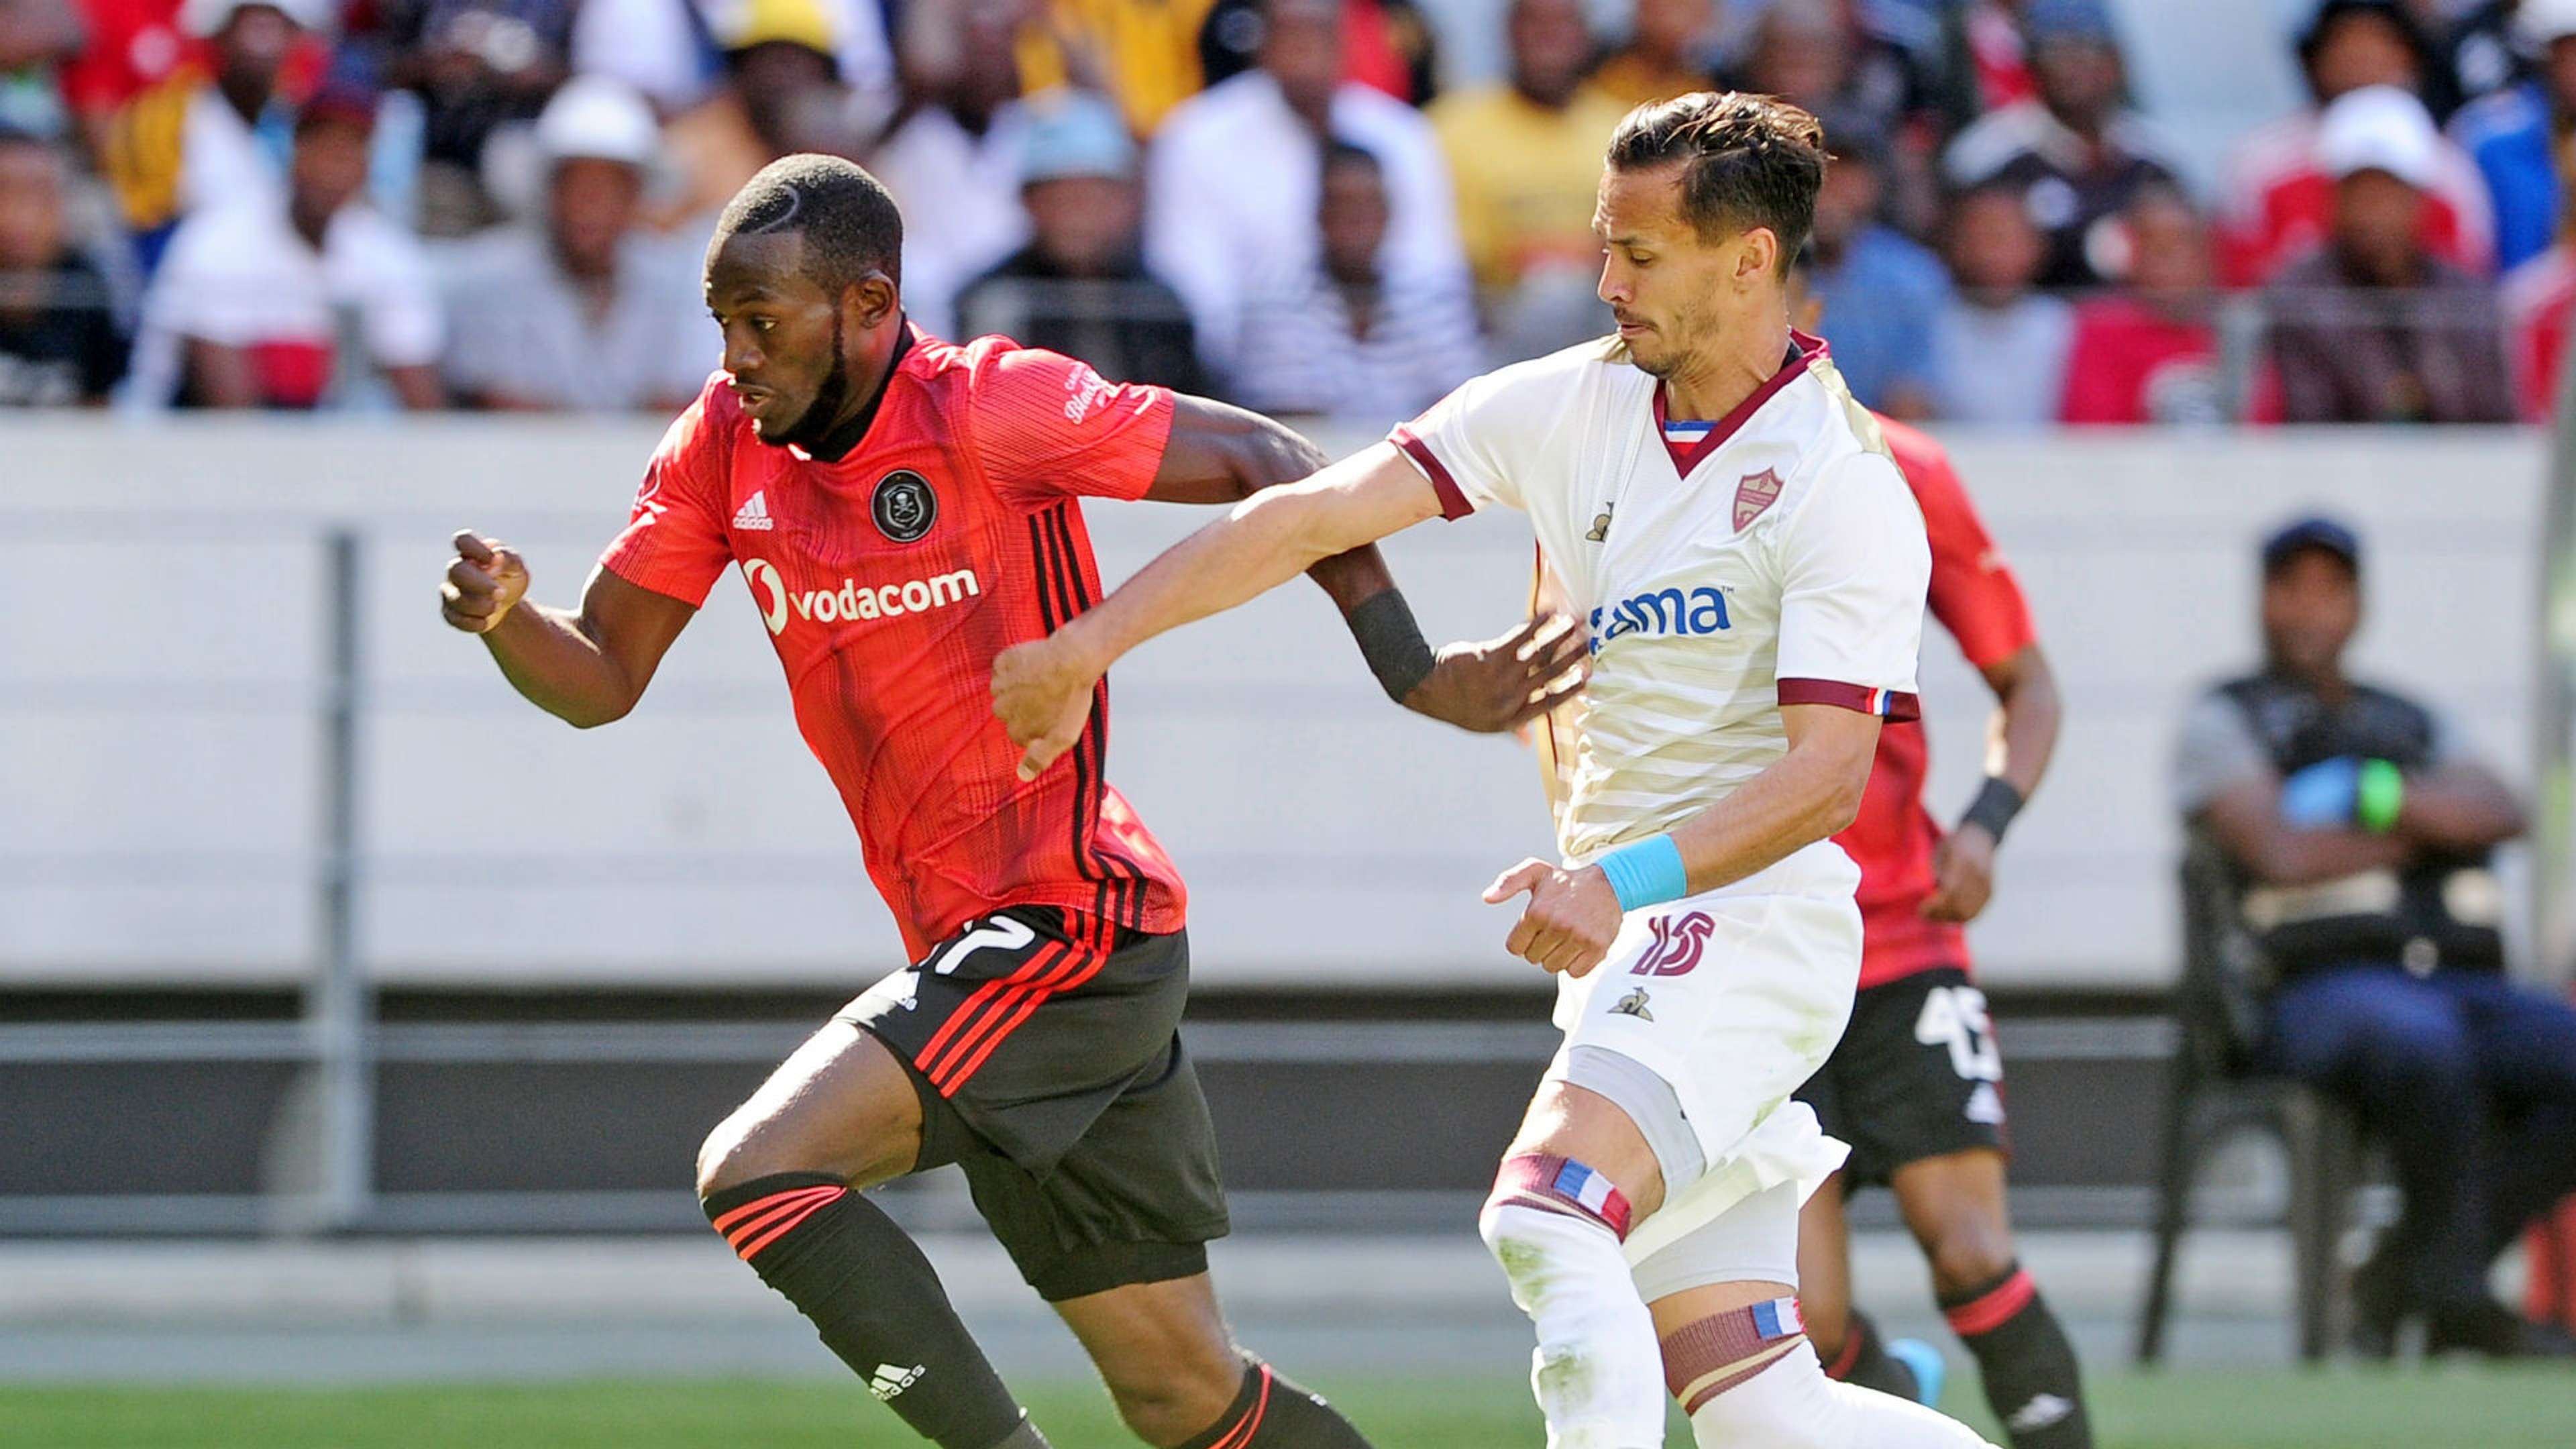 Augustine Mulenga of Orlando Pirates is challenged by Kristopher Bergman of Stellenbosch FC, October 2019